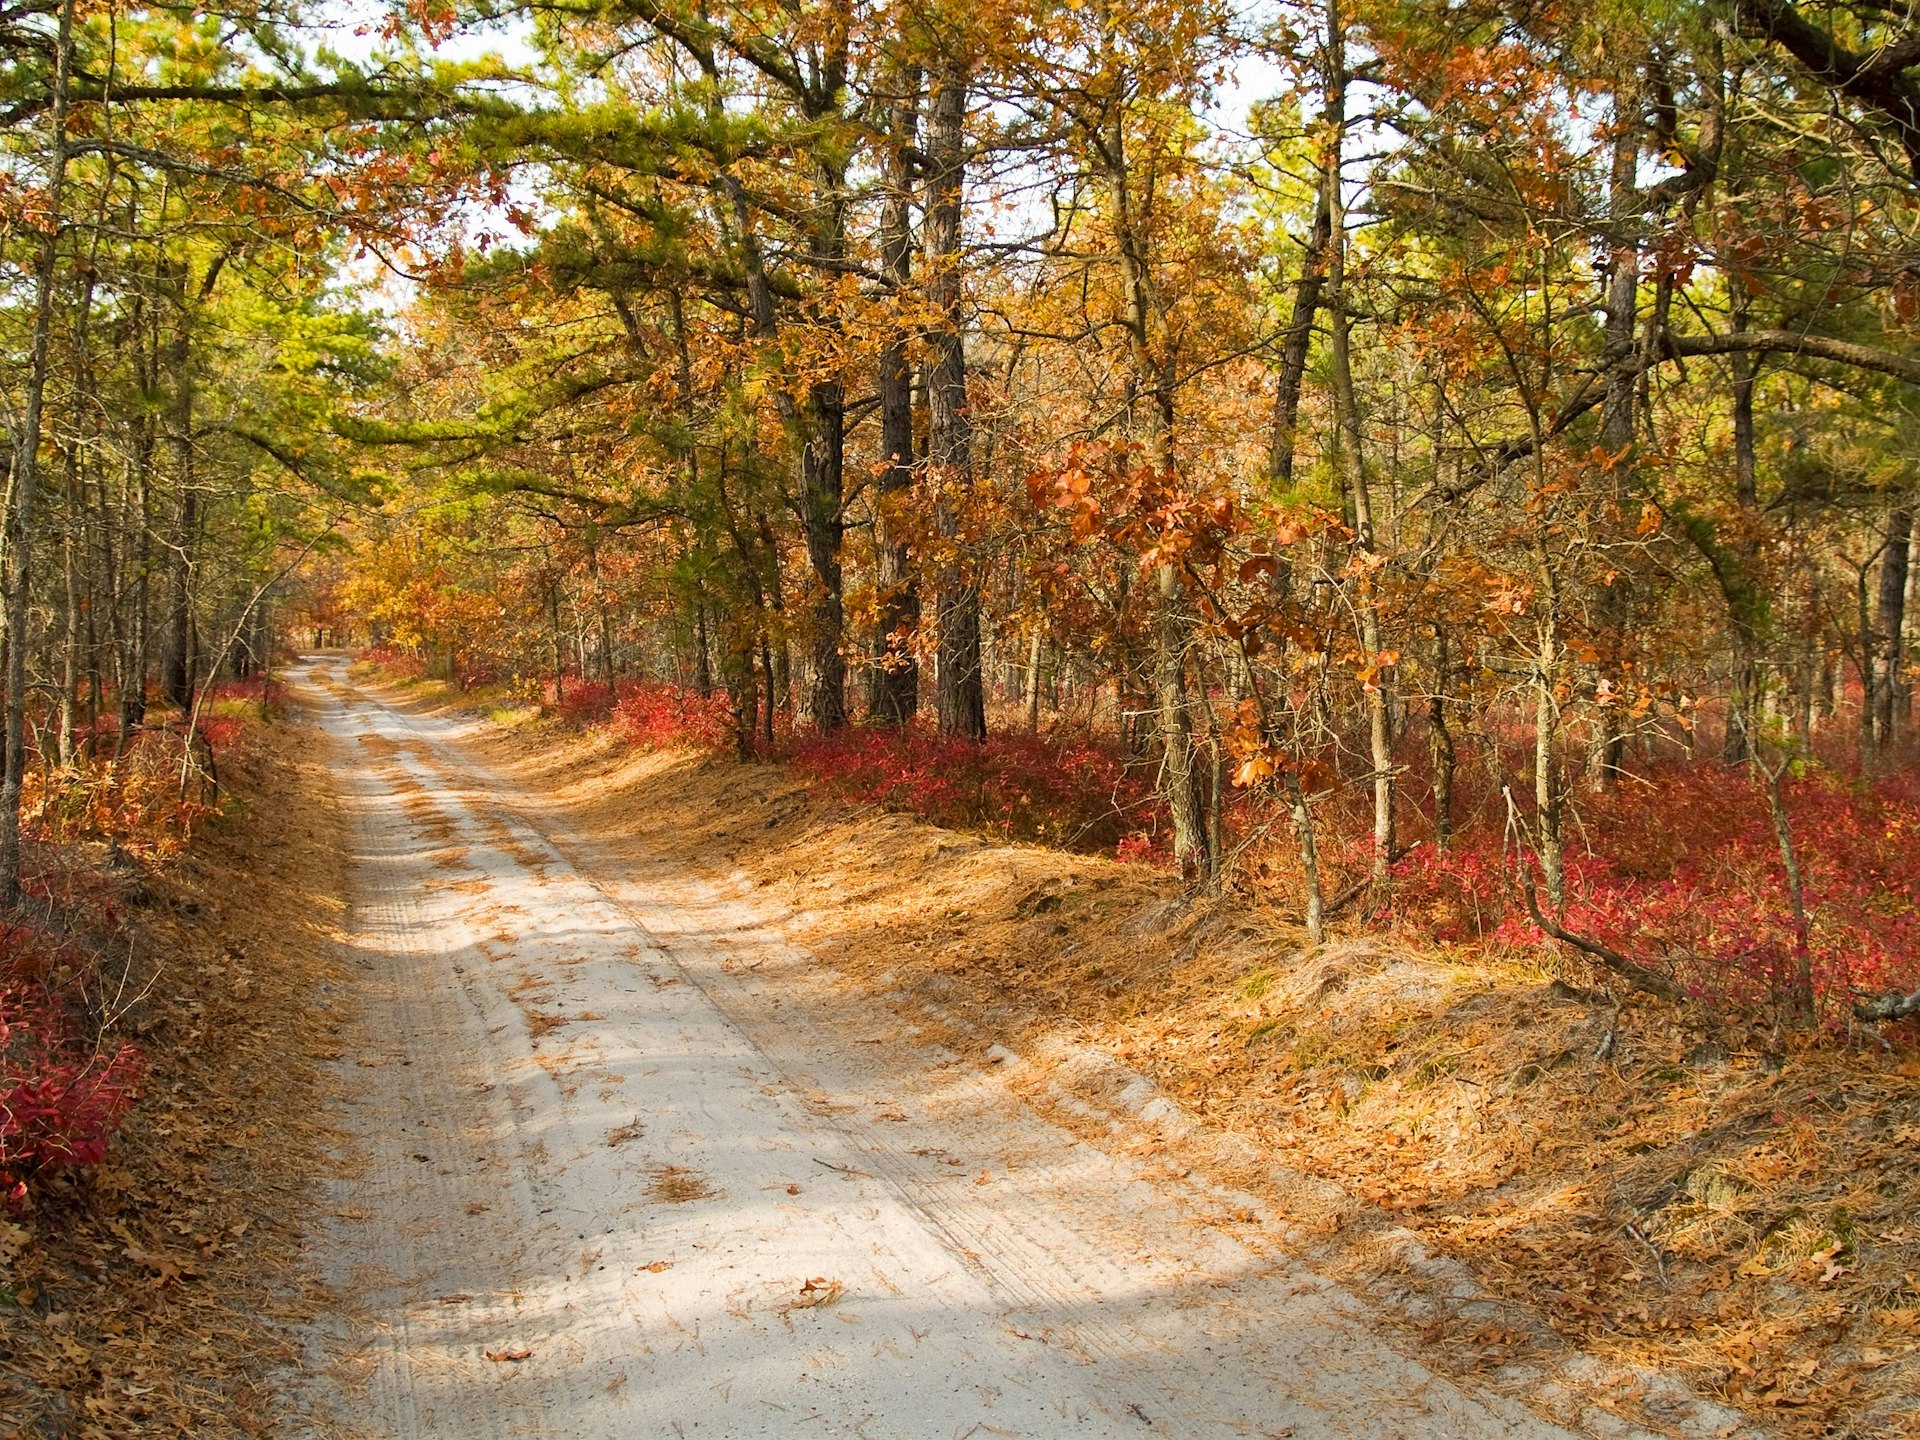 A sandy rural road going through the Pine Barrens in Southern New Jersey.